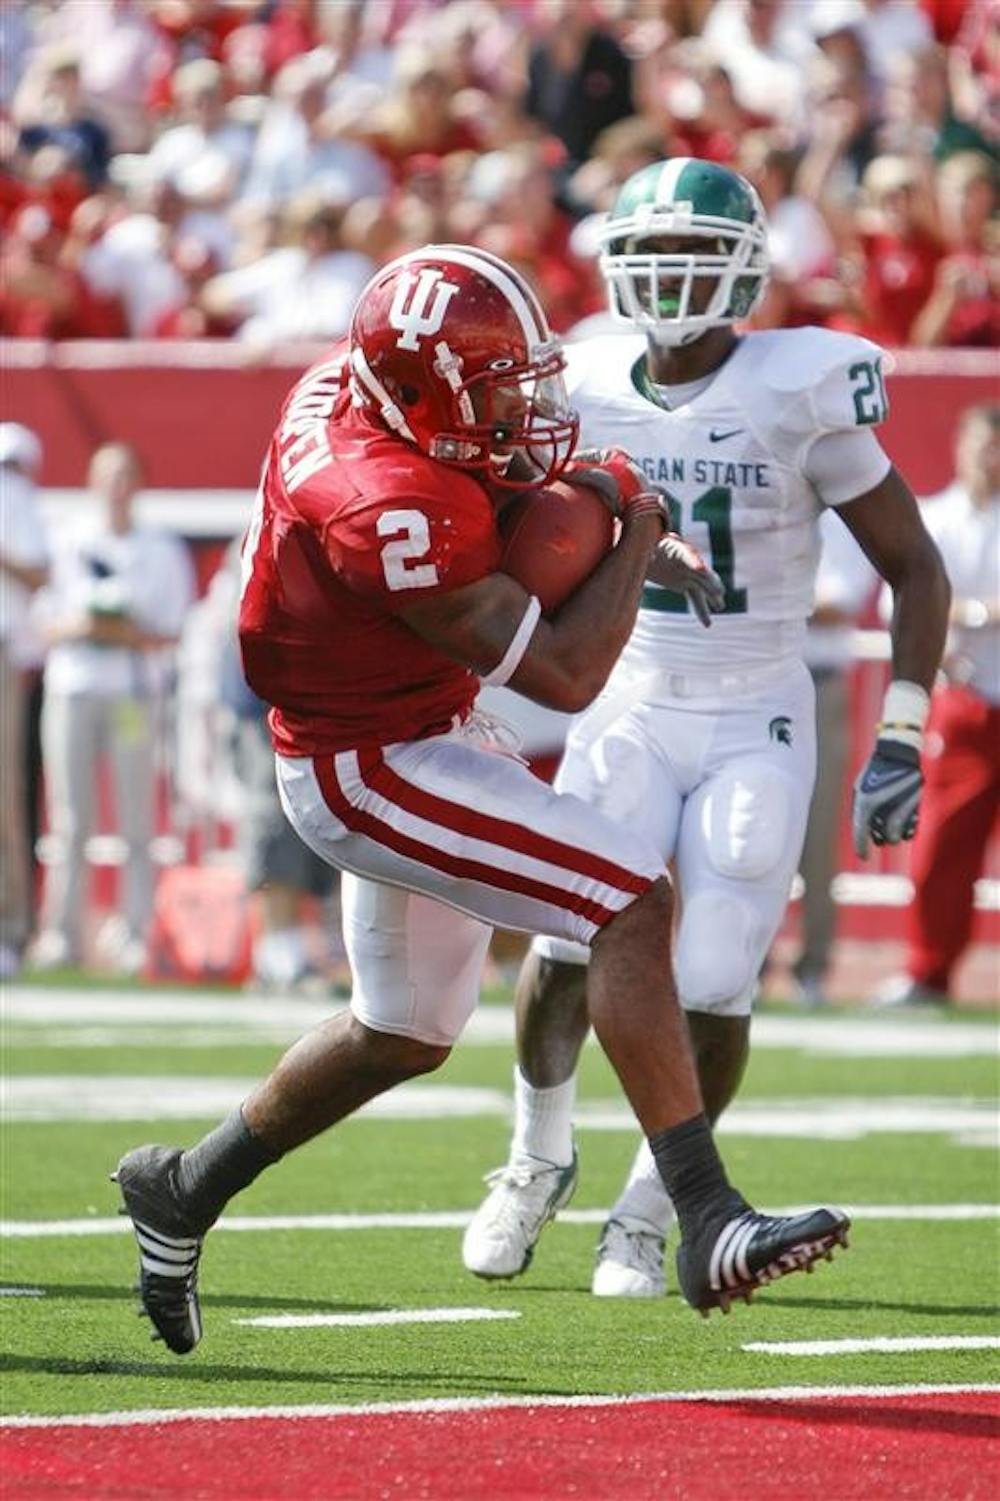 Senior running back Marcus Thigpen scores one of his three touchdowns during the Hoosiers' 42-29 loss to Michigan State Saturday afternoon at Memorial Stadium. Thigpen finished with 207 total yards.